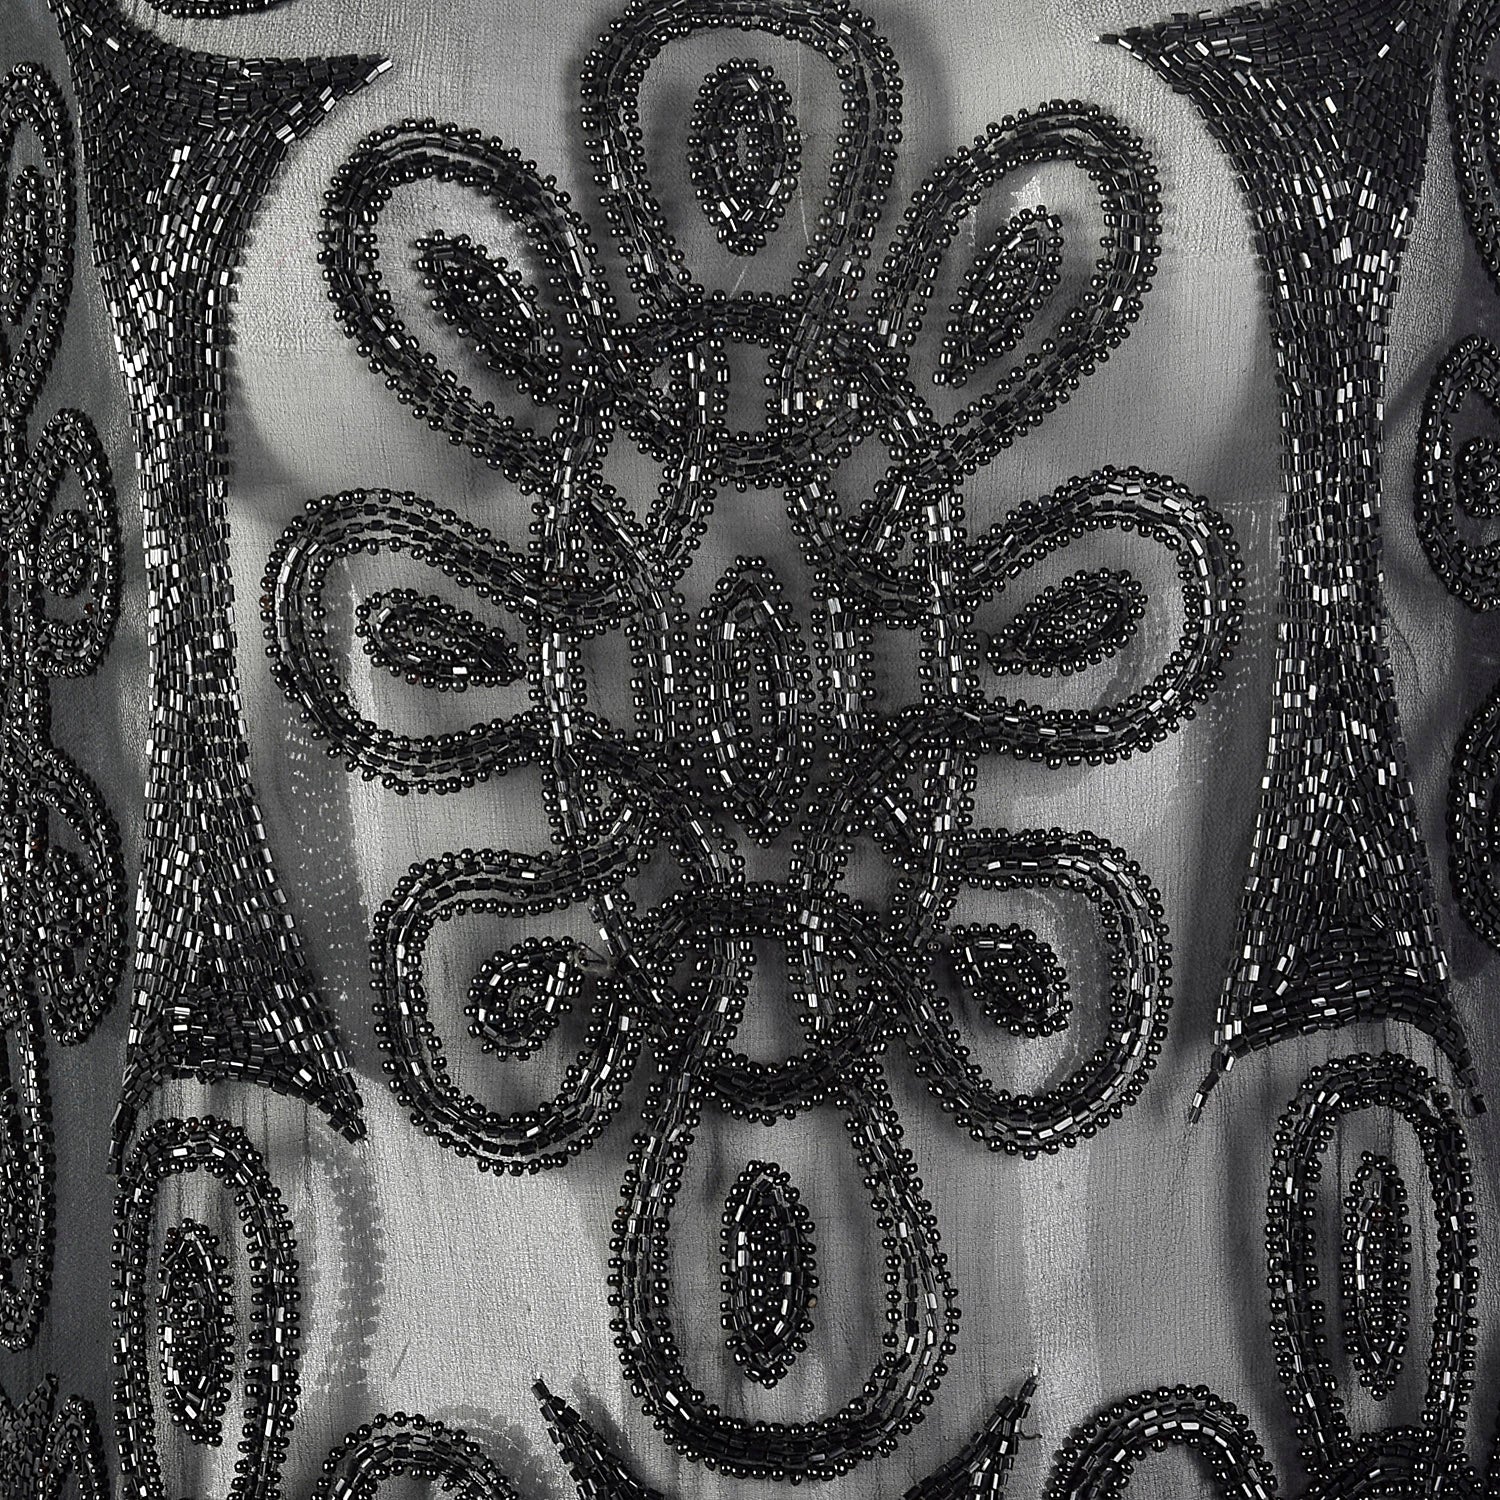 1920s Beaded Black Silk Dress with Celtic Style Knots